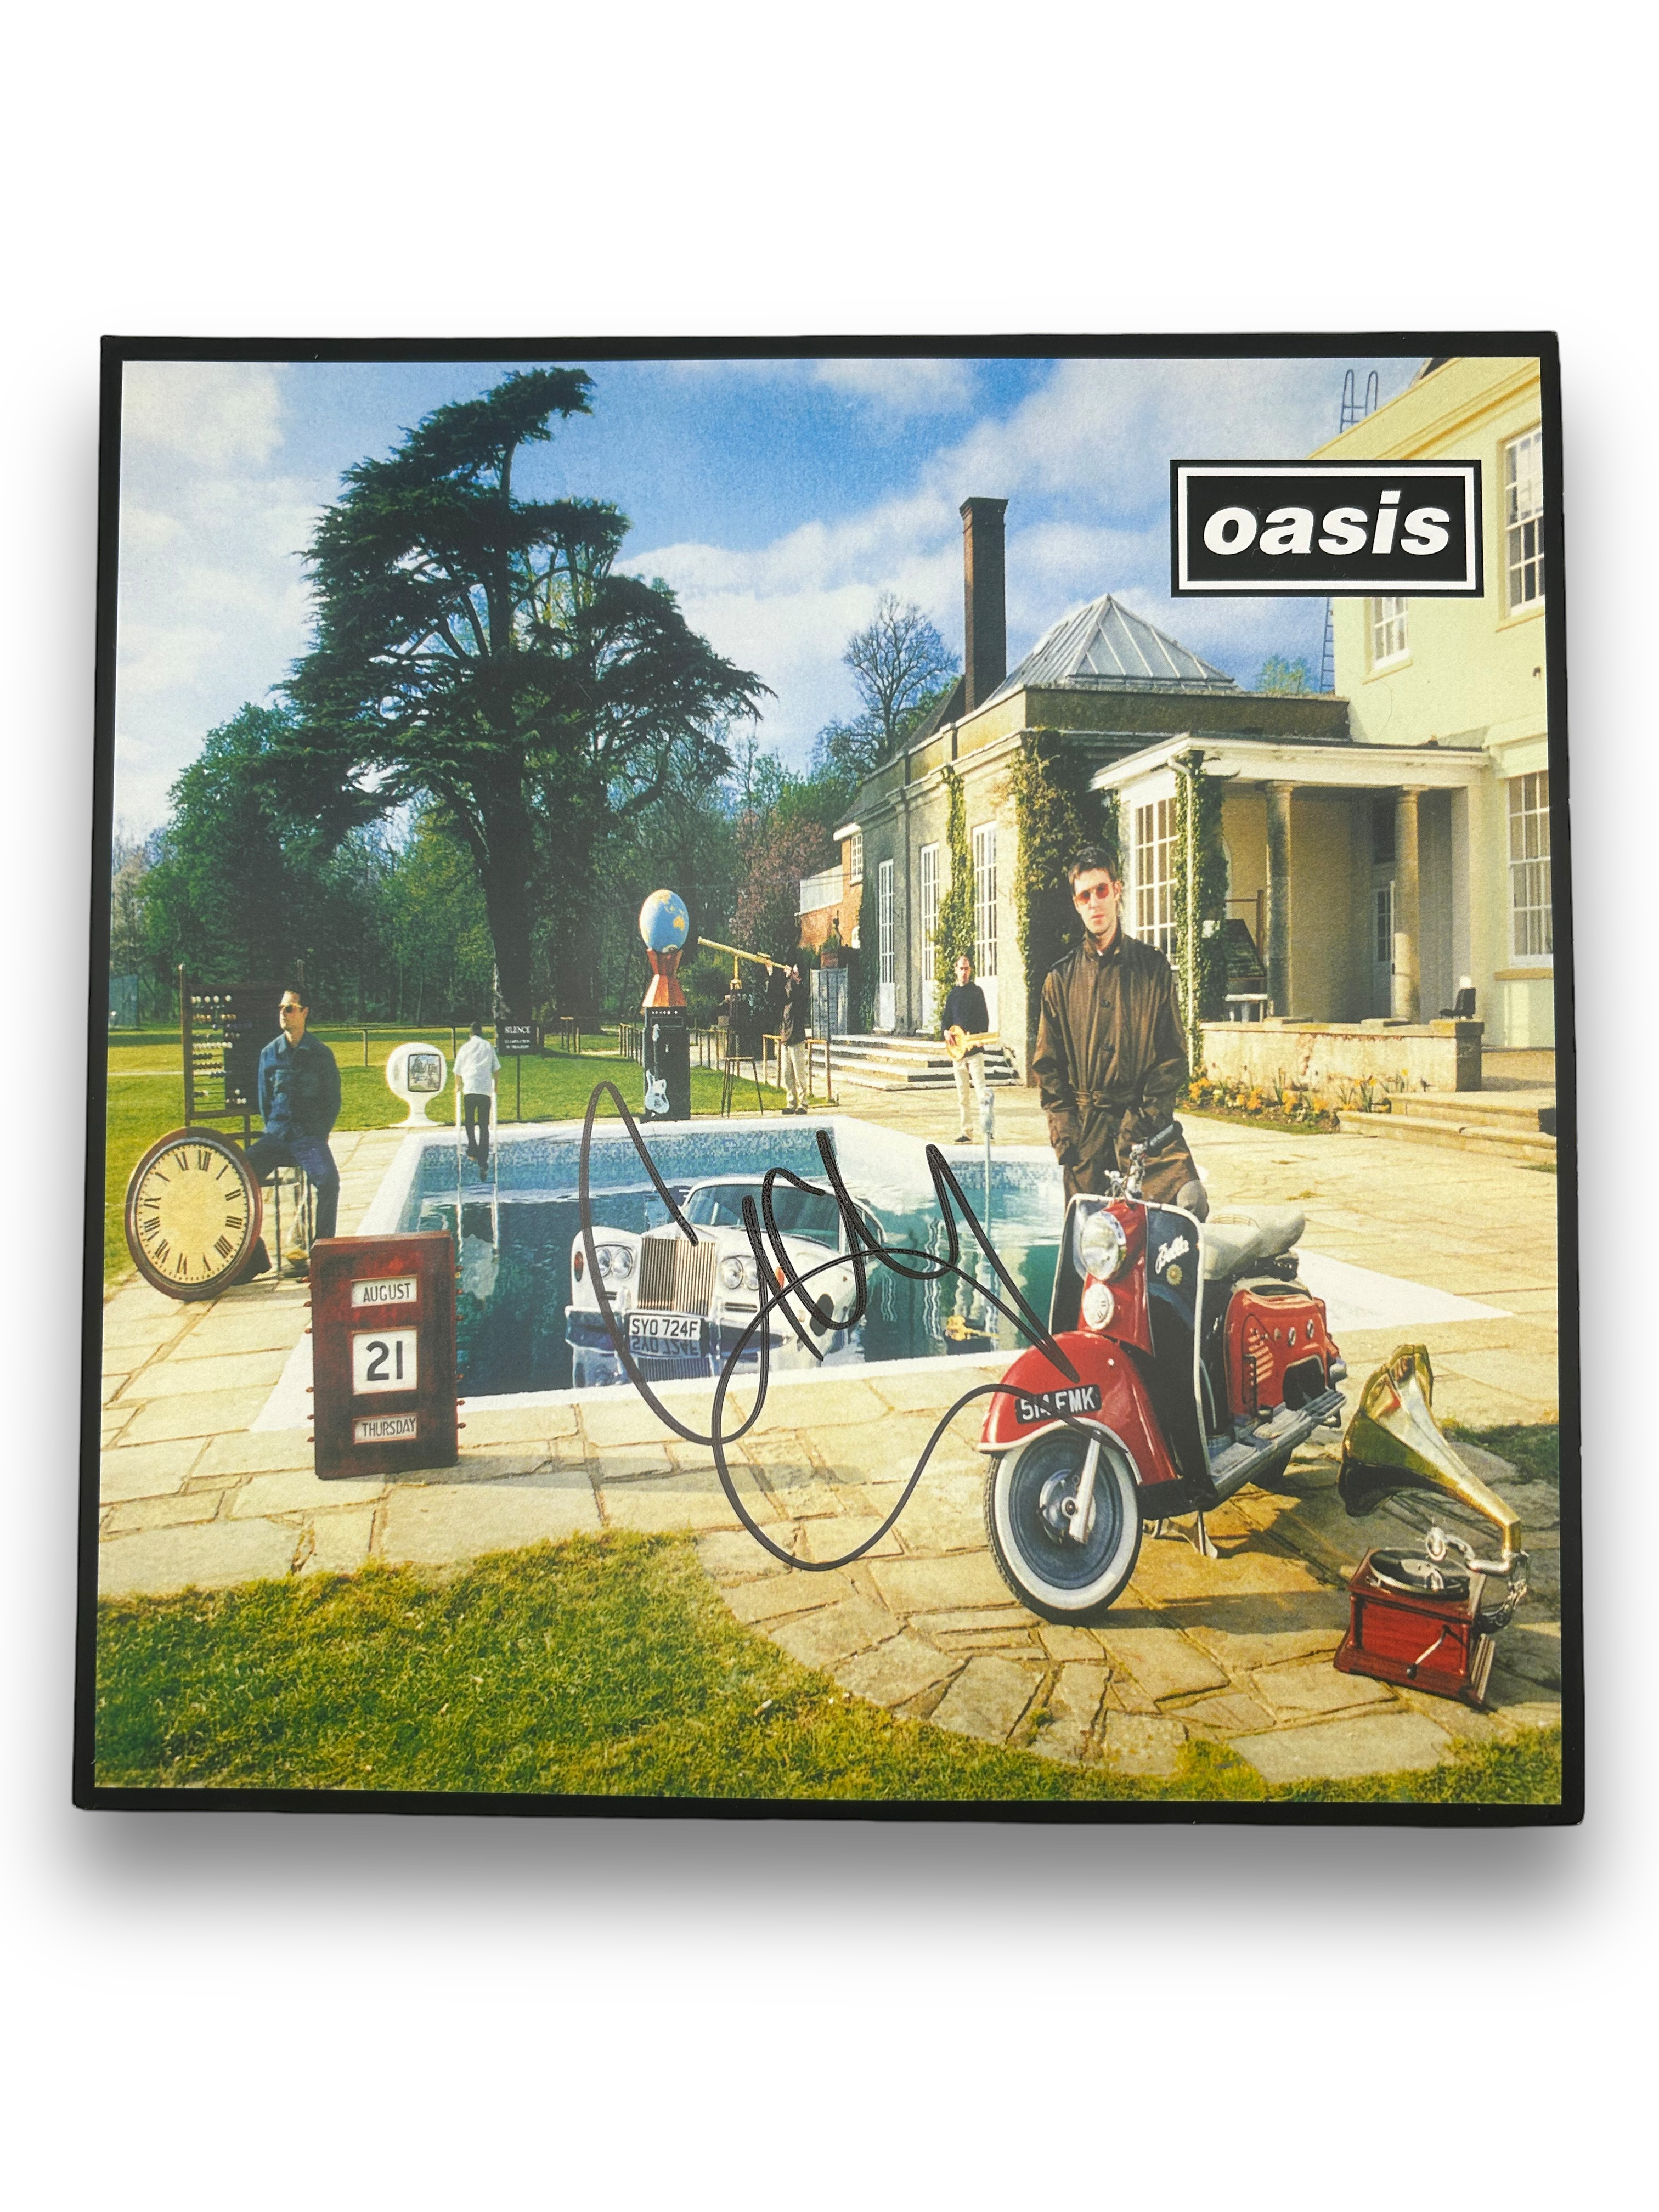 LIAM GALLAGHER SIGNED BE HERE NOW OASIS LP VINYL (AFTAL COA)